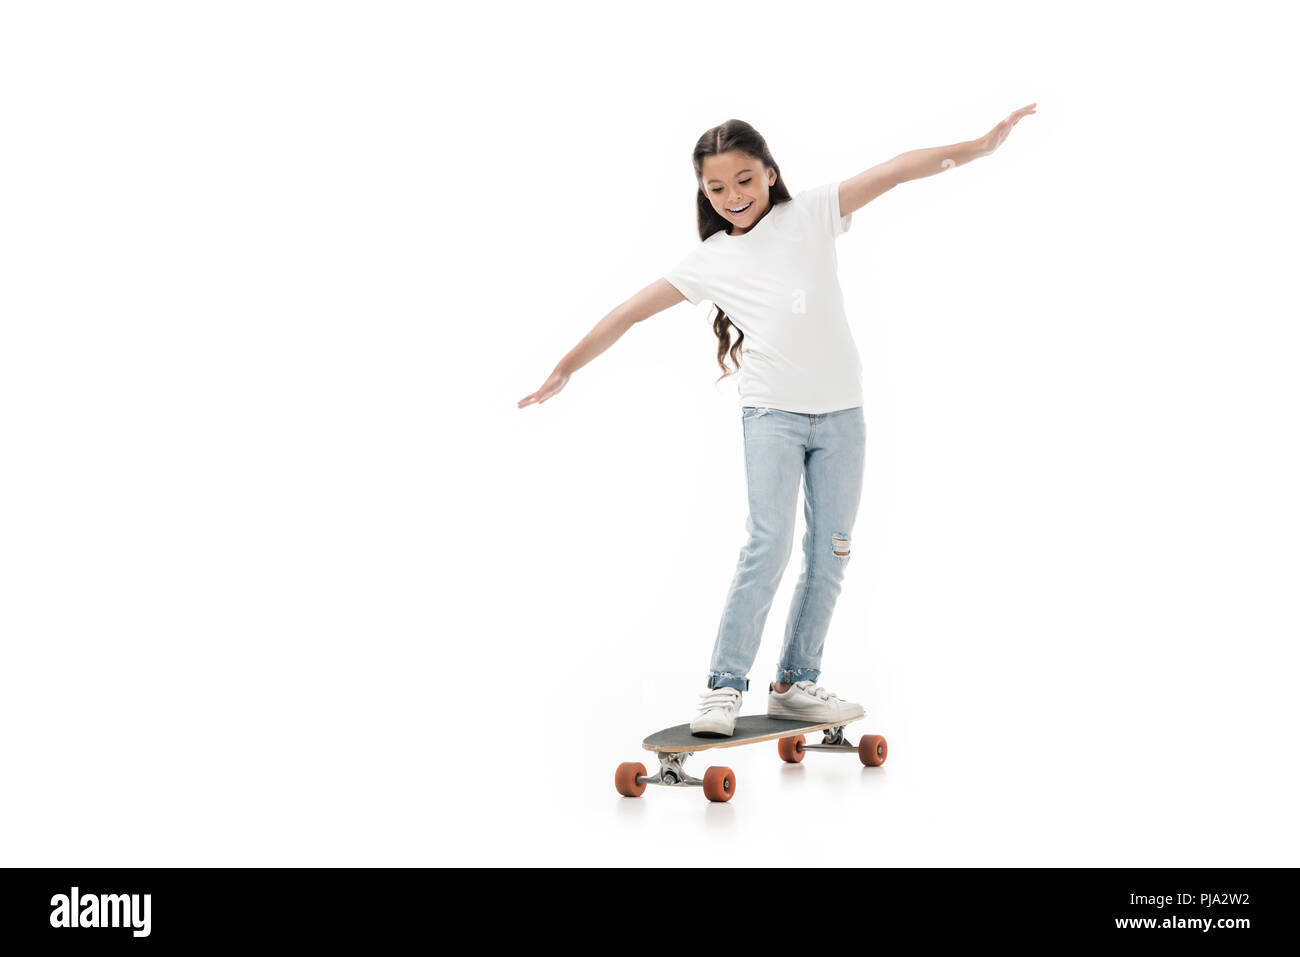 cheerful kid with outstretched arms skating skateboard isolated on white Stock Photo